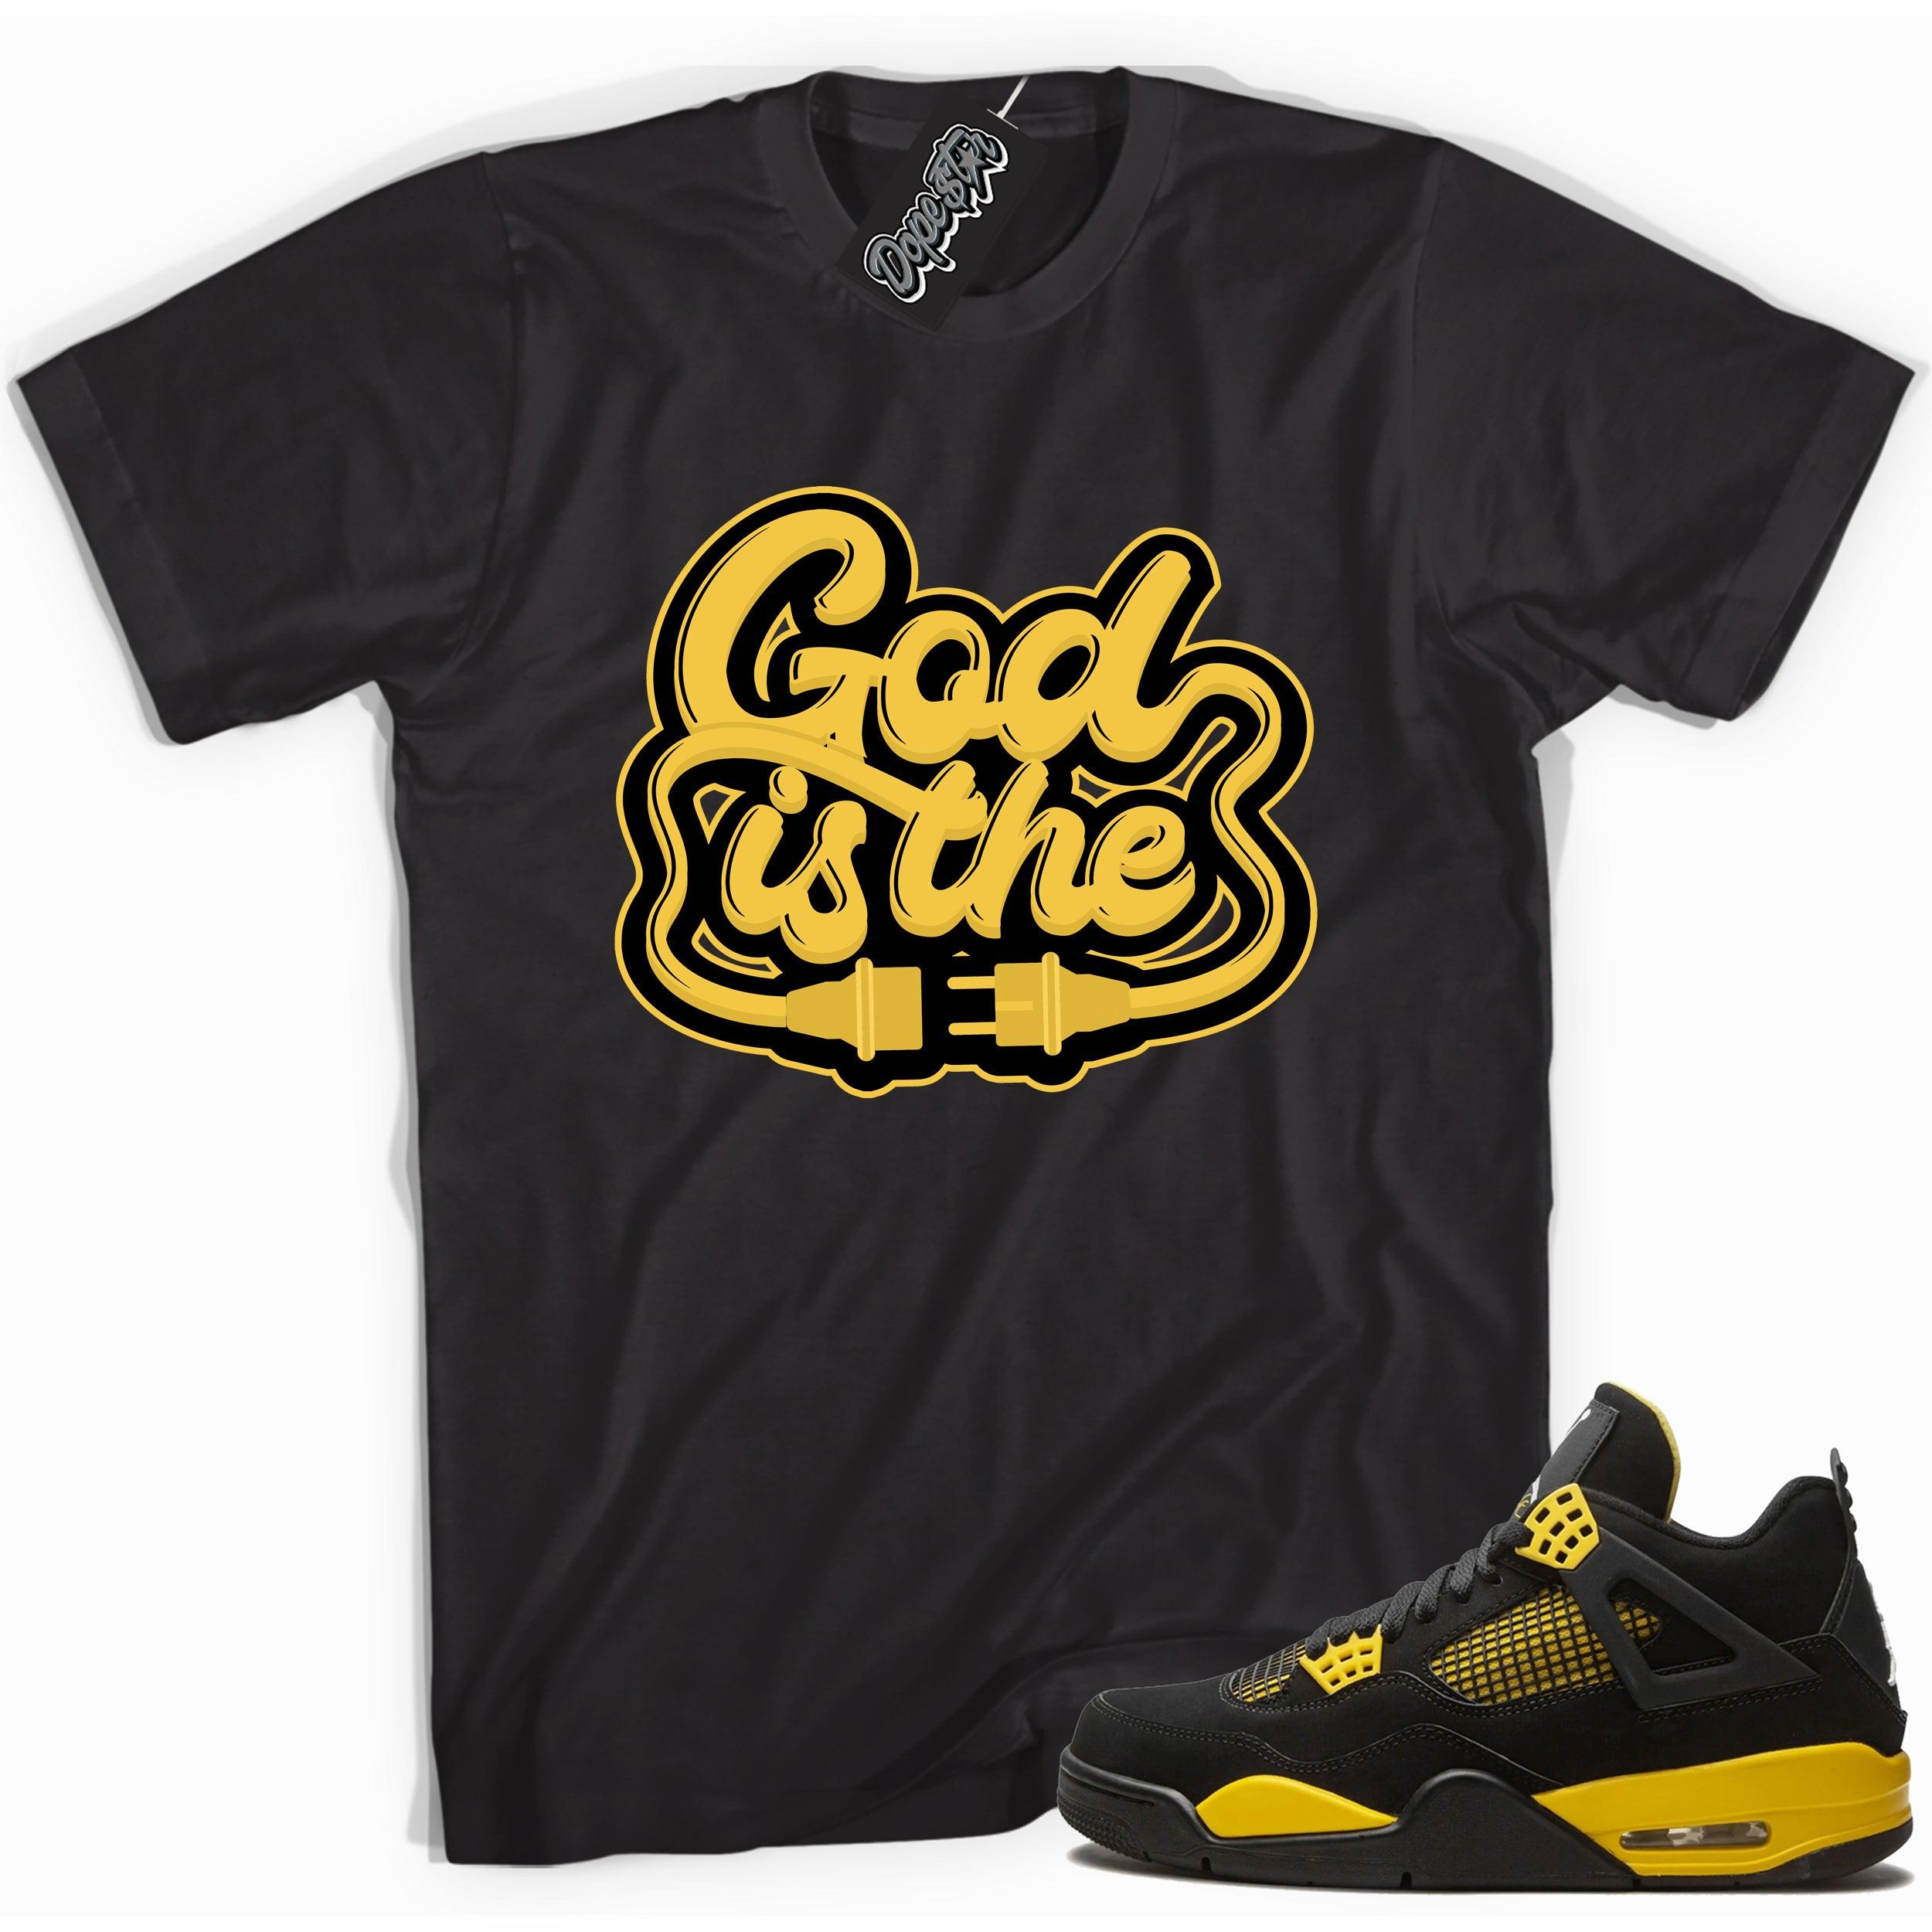 Cool black graphic tee with 'god is the plug' print, that perfectly matches  Air Jordan 4 Thunder sneakers